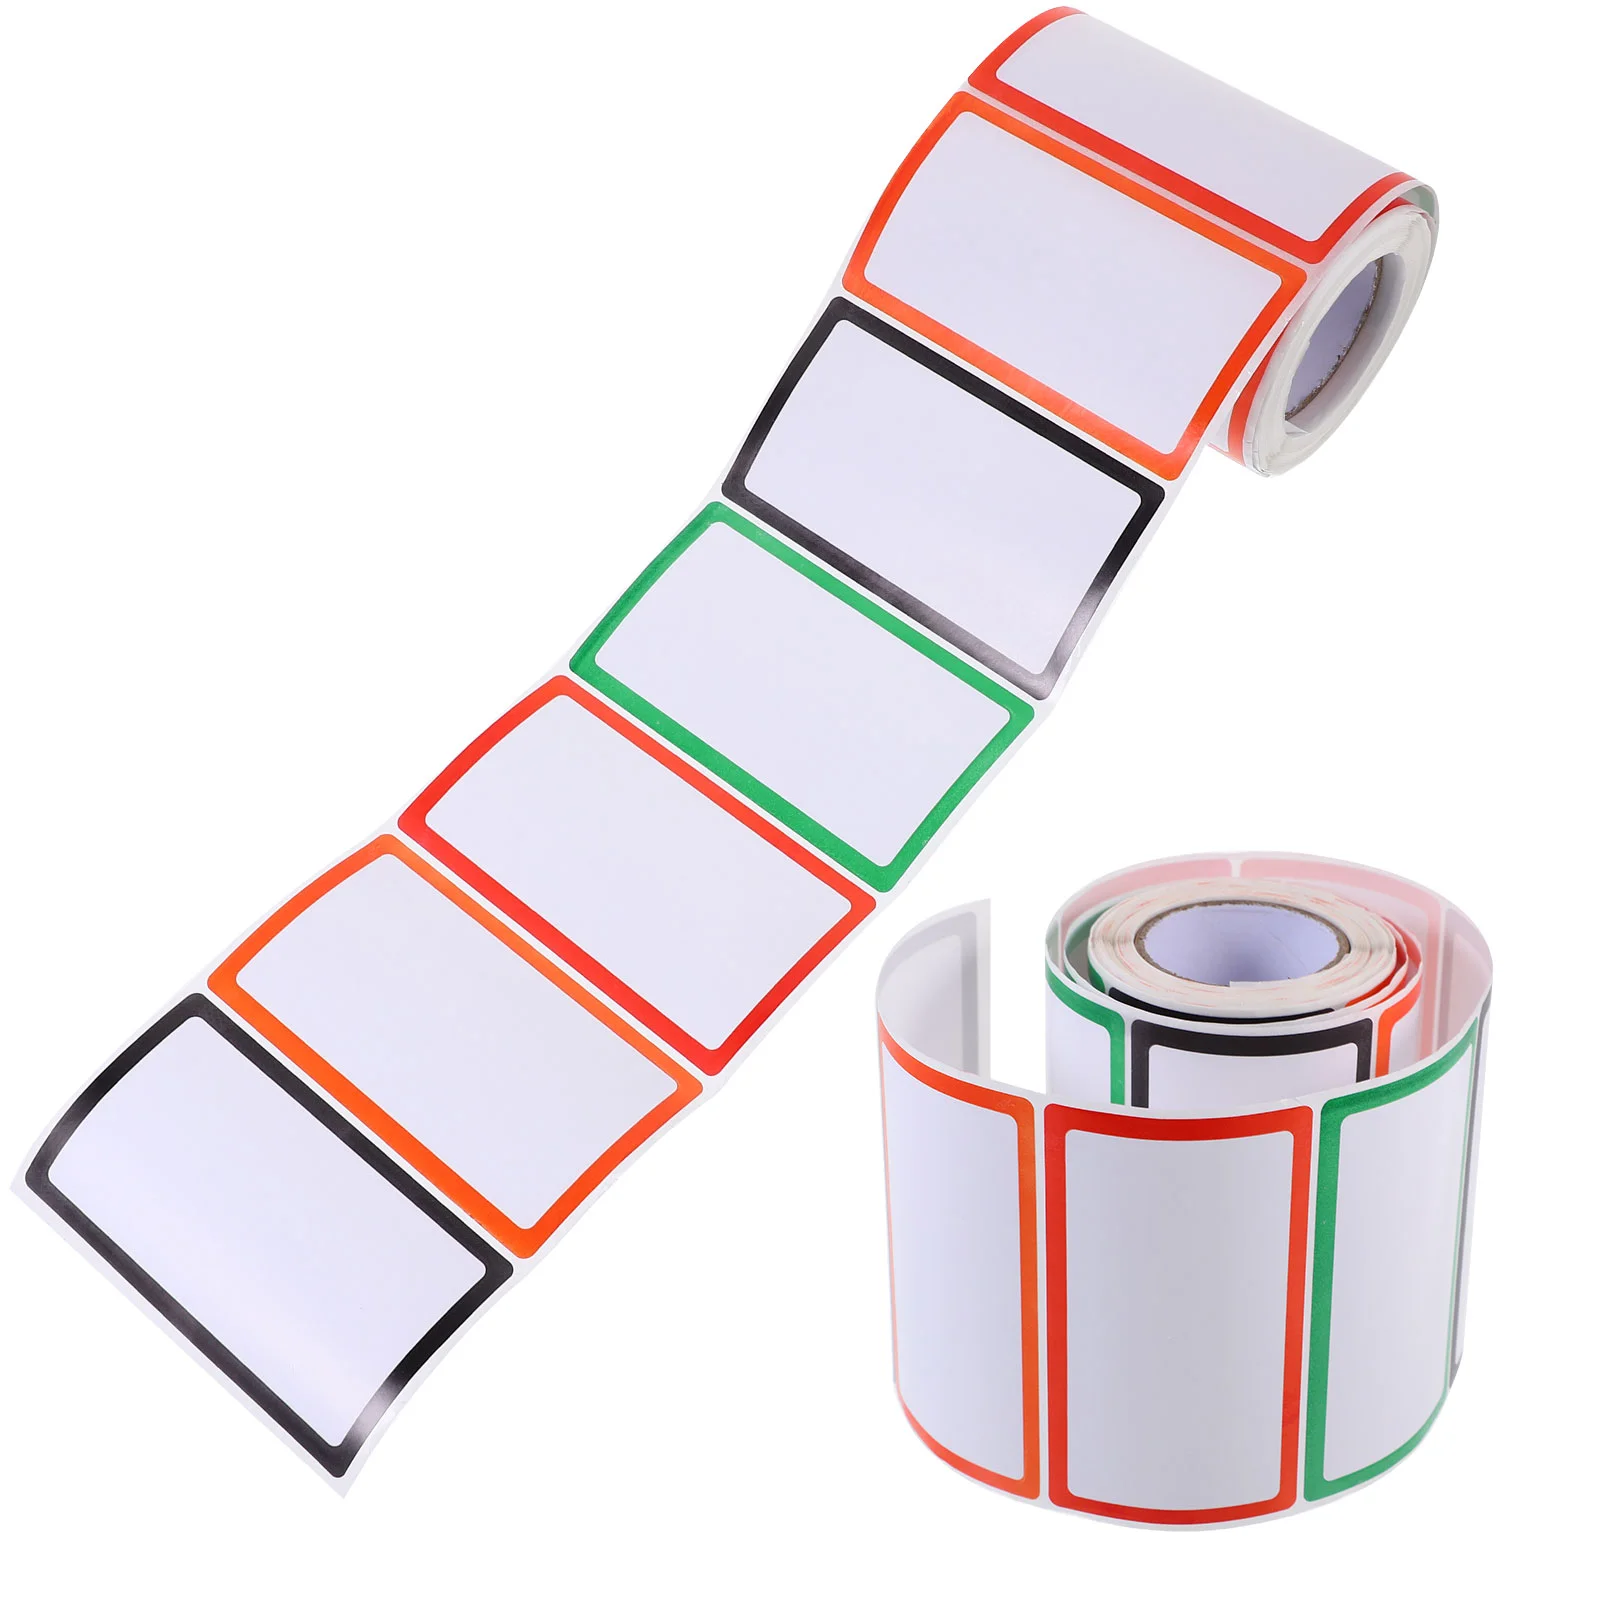 

2 Rolls Name Tag Stickers Label Labels Dry Erase Blank Sticky Tags Coated Paper Office Small Notes